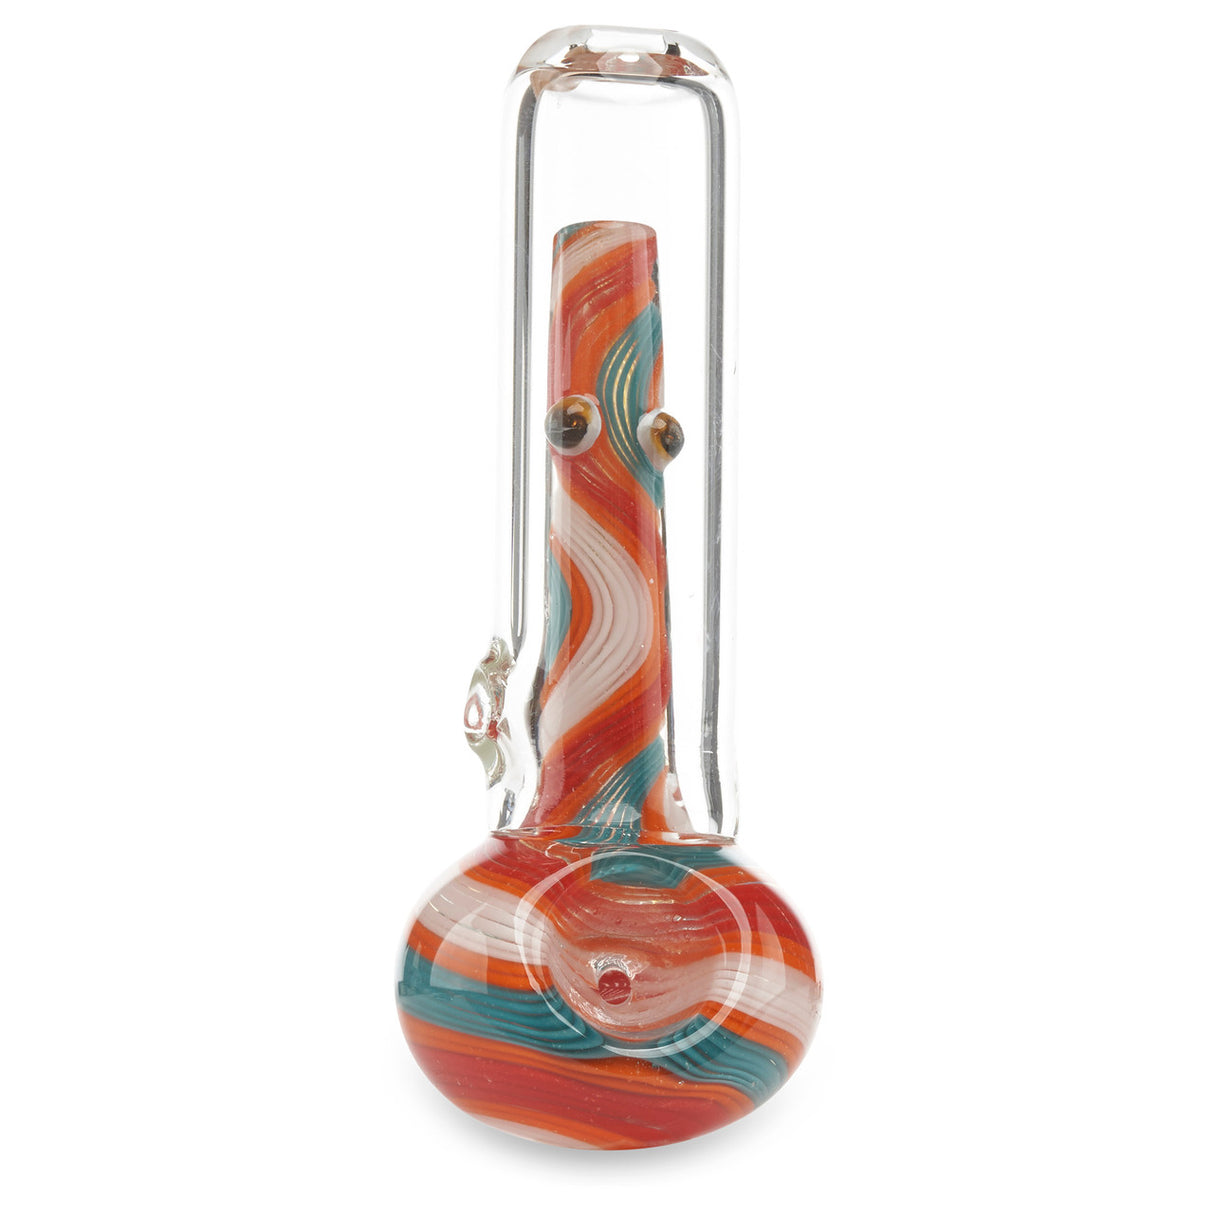 Pioneer trapped in a tube hand pipe for sale at cloud 9 smoke co